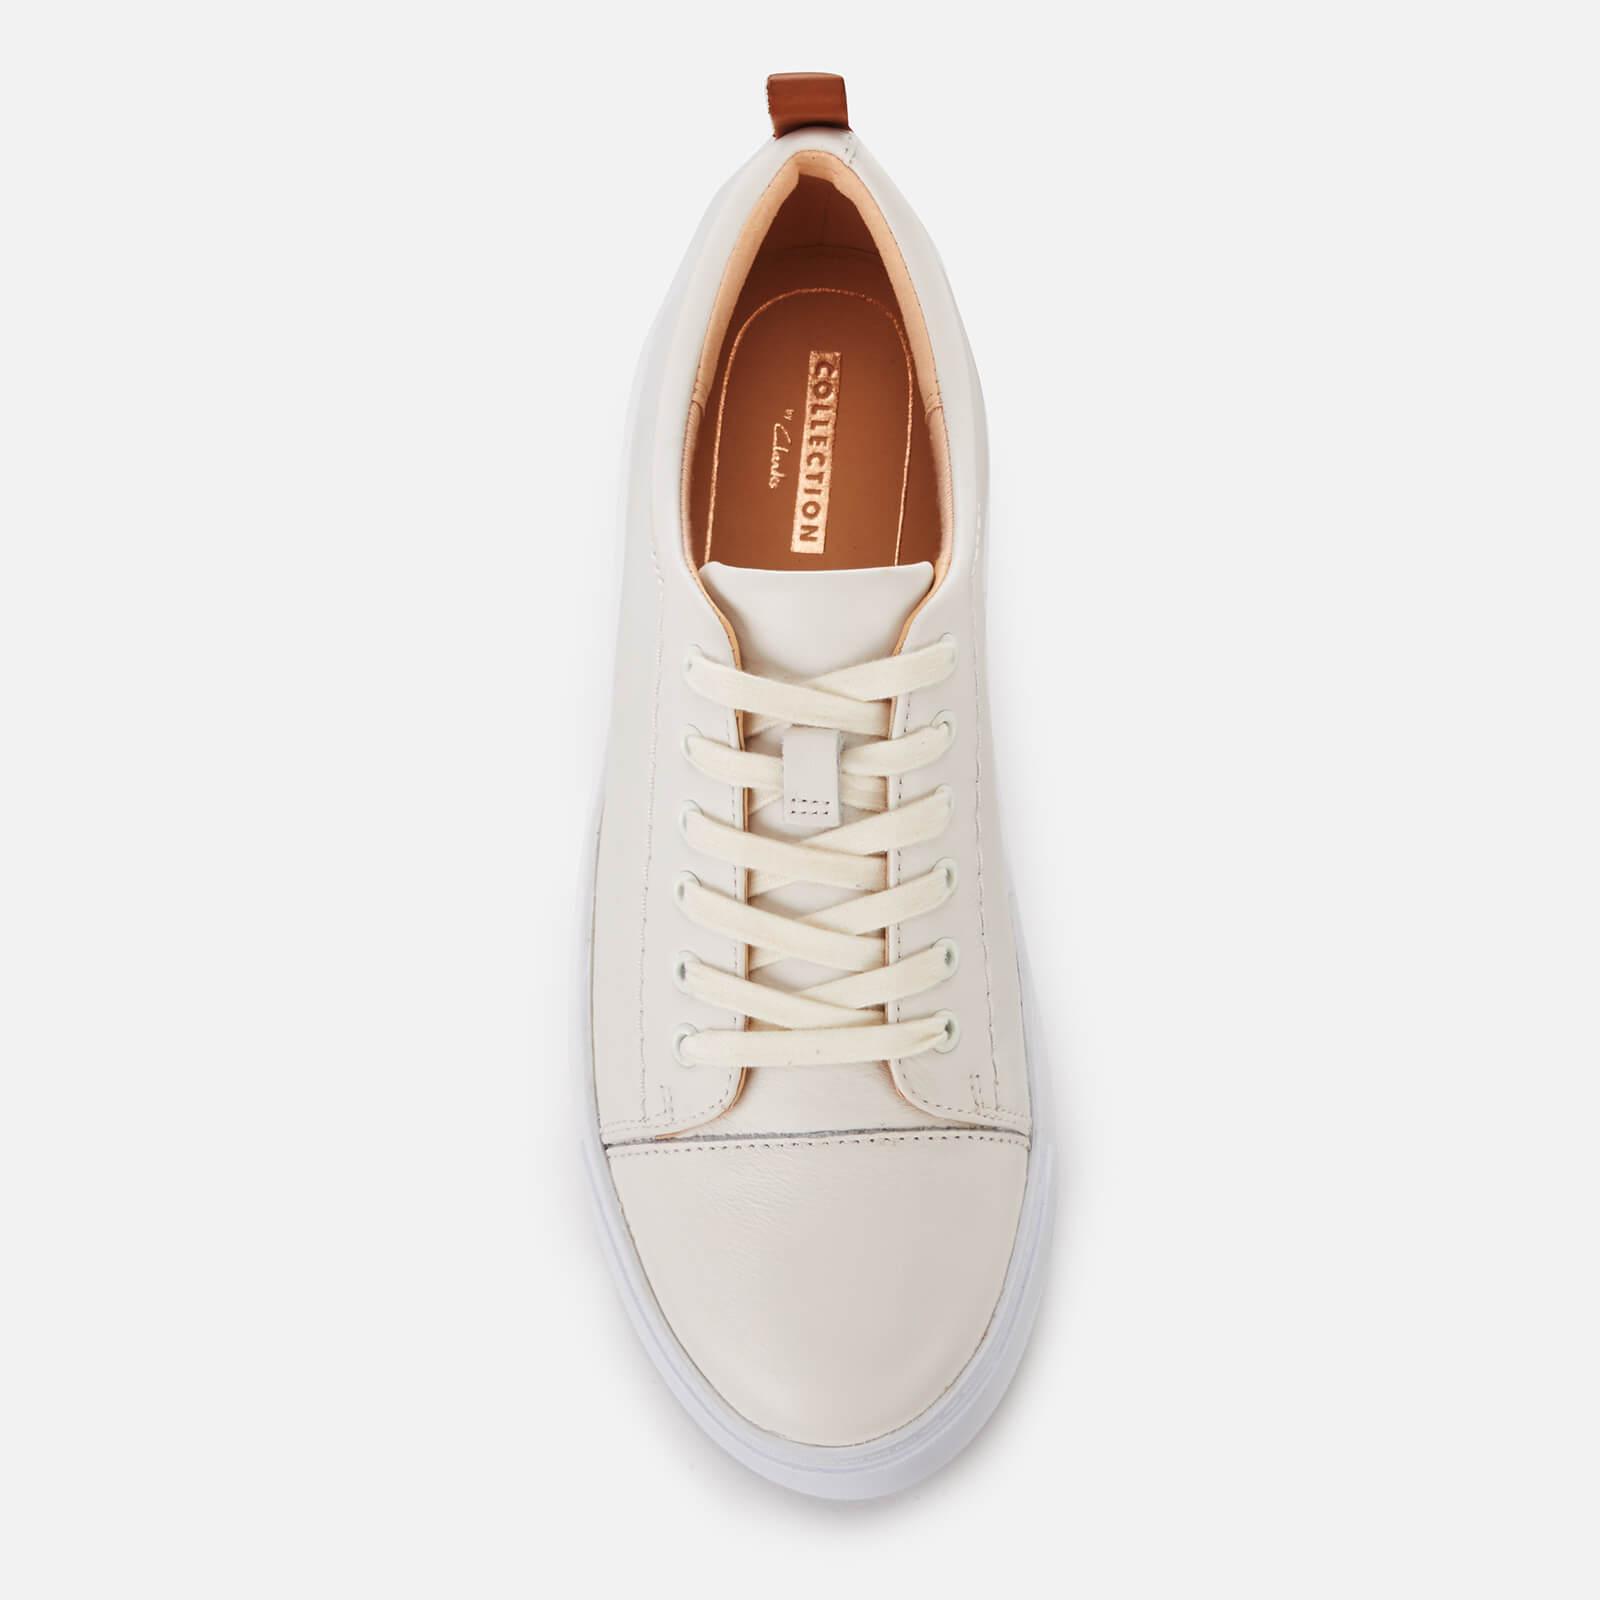 Clarks Glove Echo Leather Low Top Trainers in White | Lyst Australia